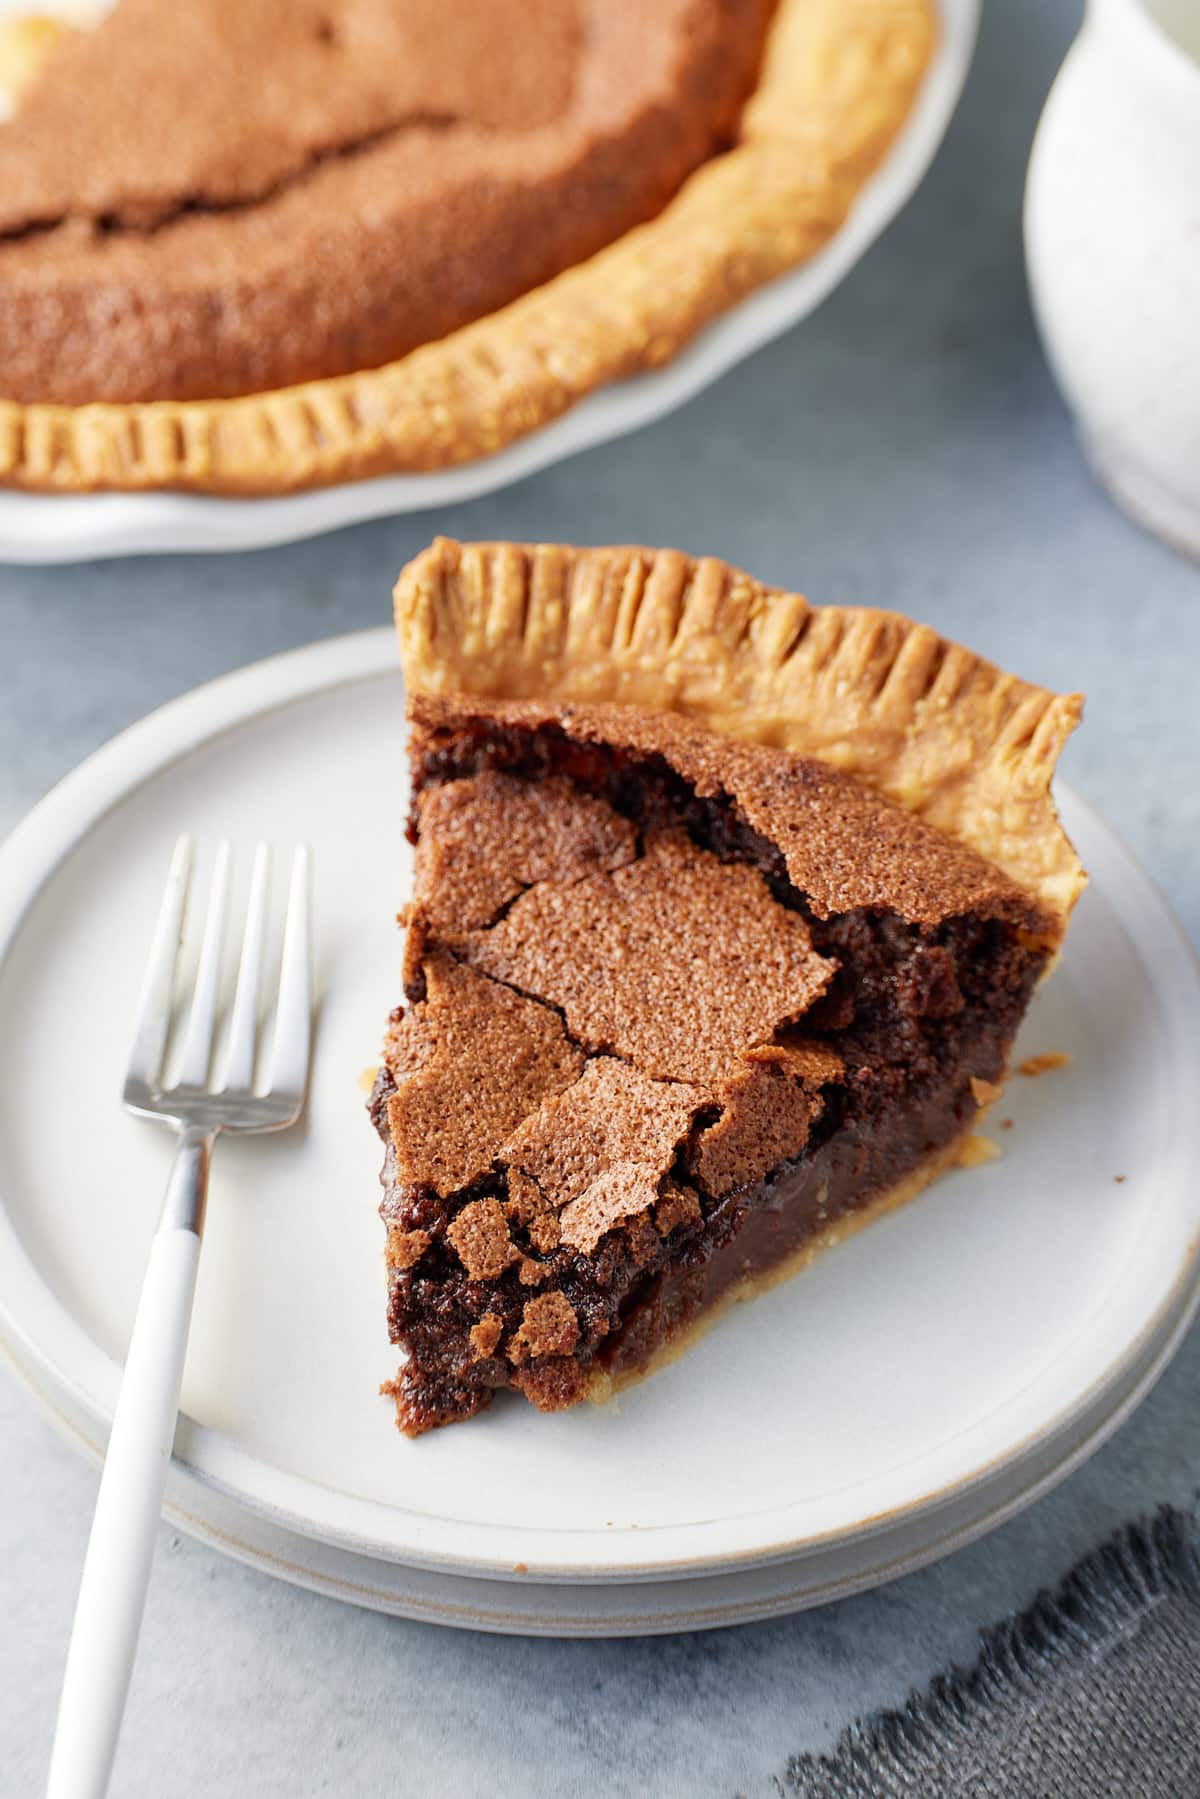 A slice of chocolate chess pie on a plate with a serving fork and the larger pie set alongside